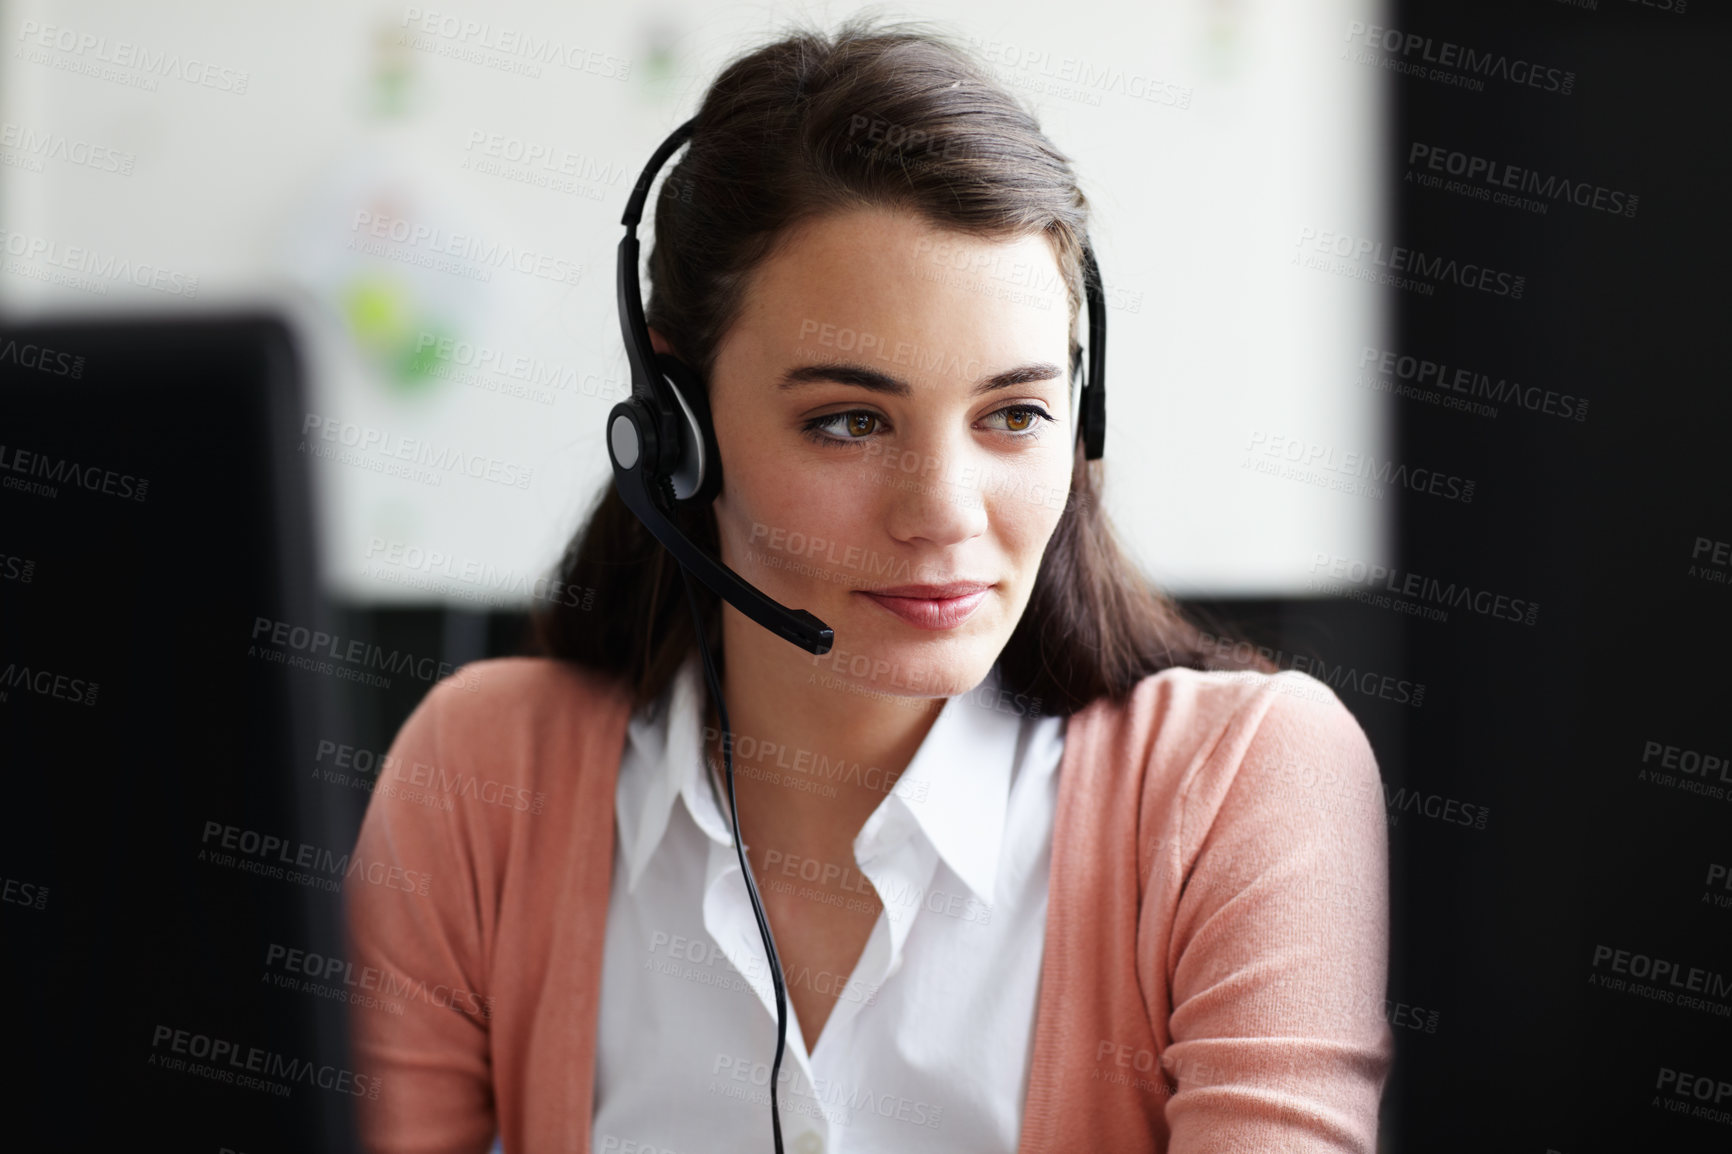 Buy stock photo A pretty young woman wearing a headset looking at her computer screen